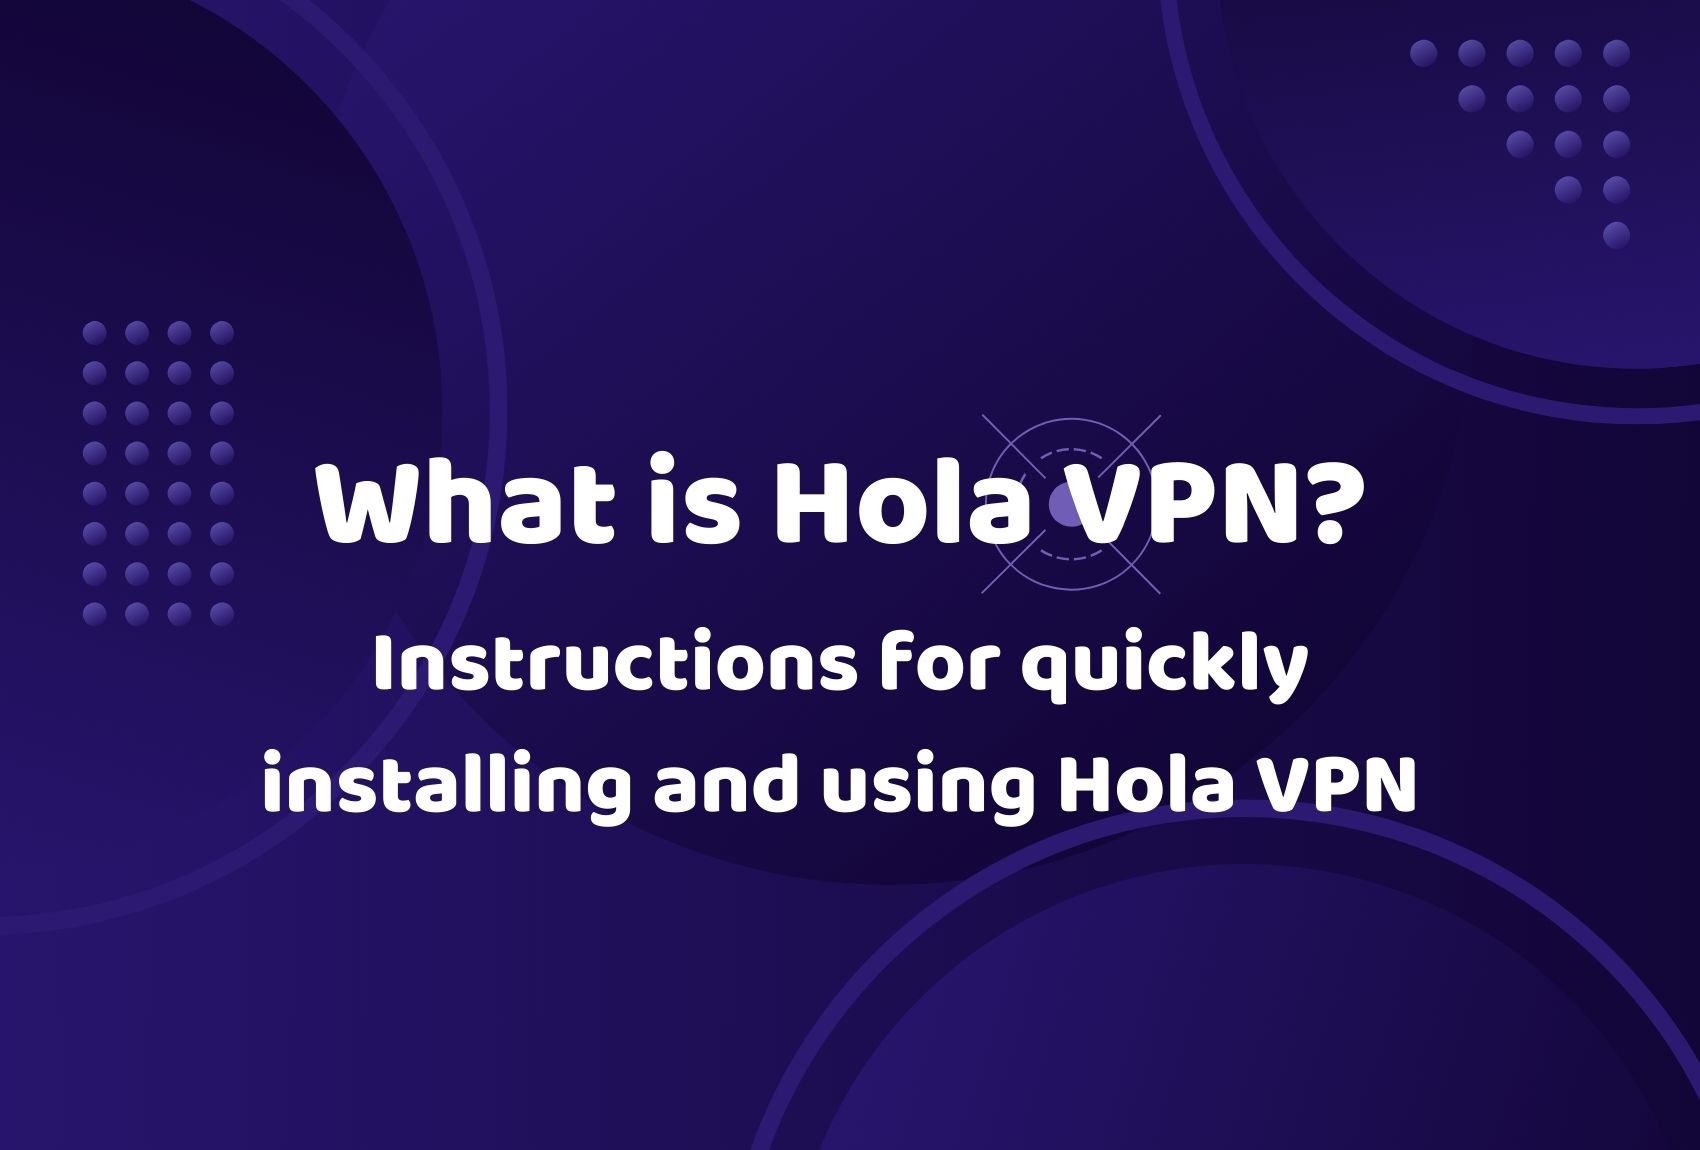 What is Hola VPN? Instructions for quickly installing and using Hola VPN